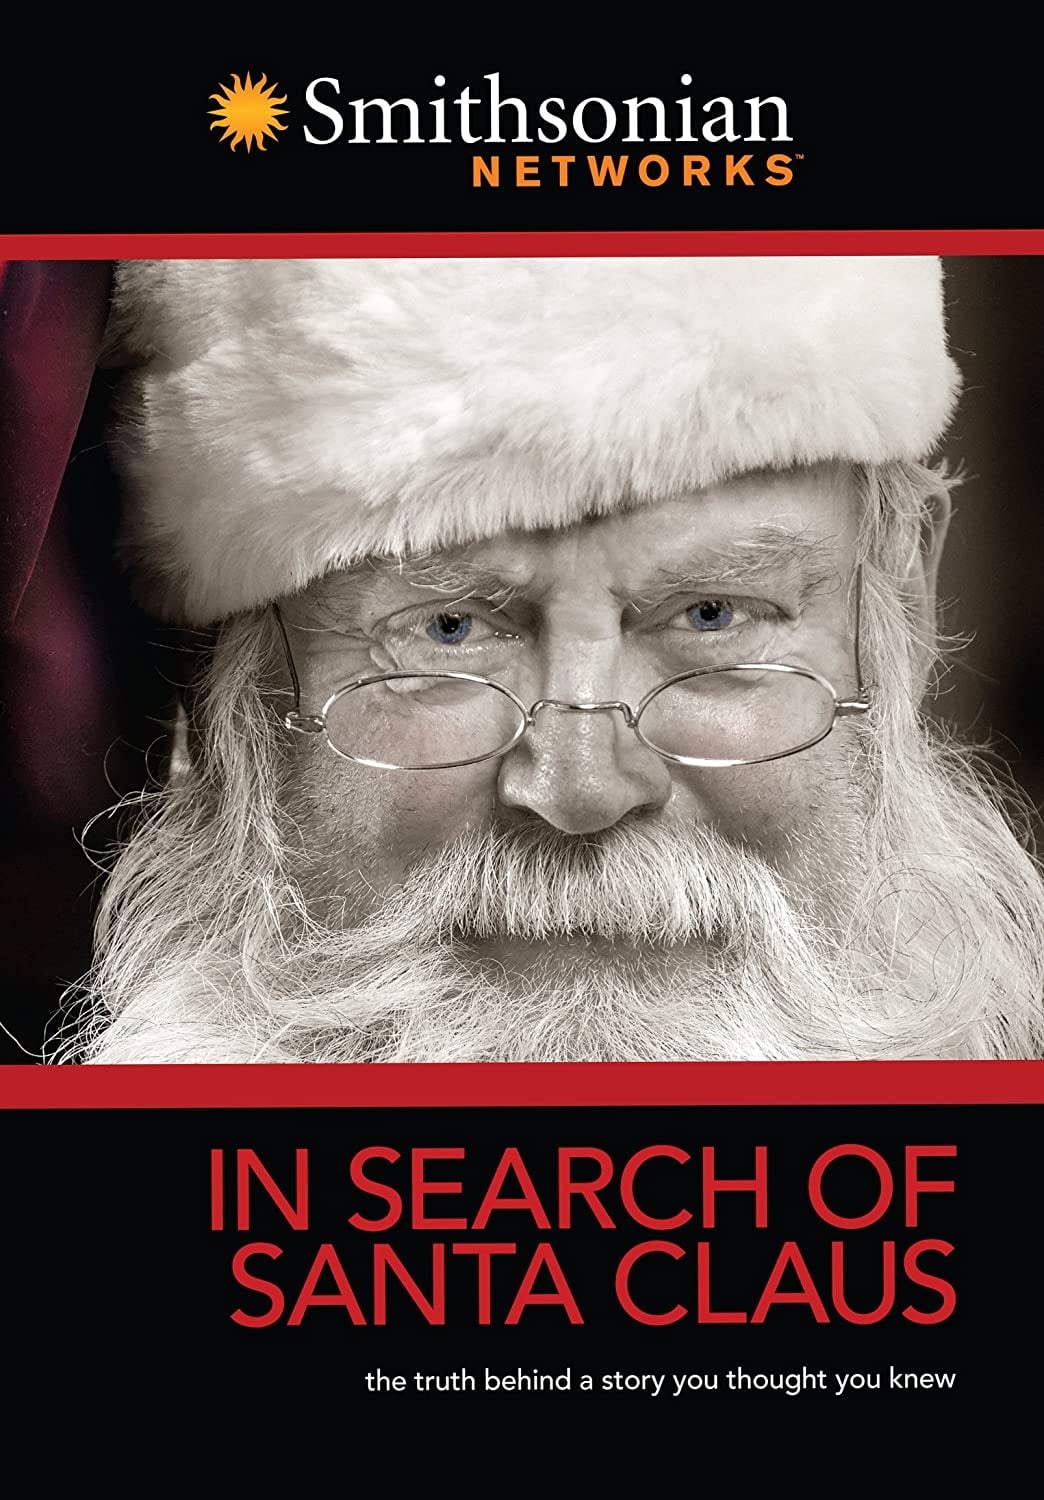 In Search of Santa Claus